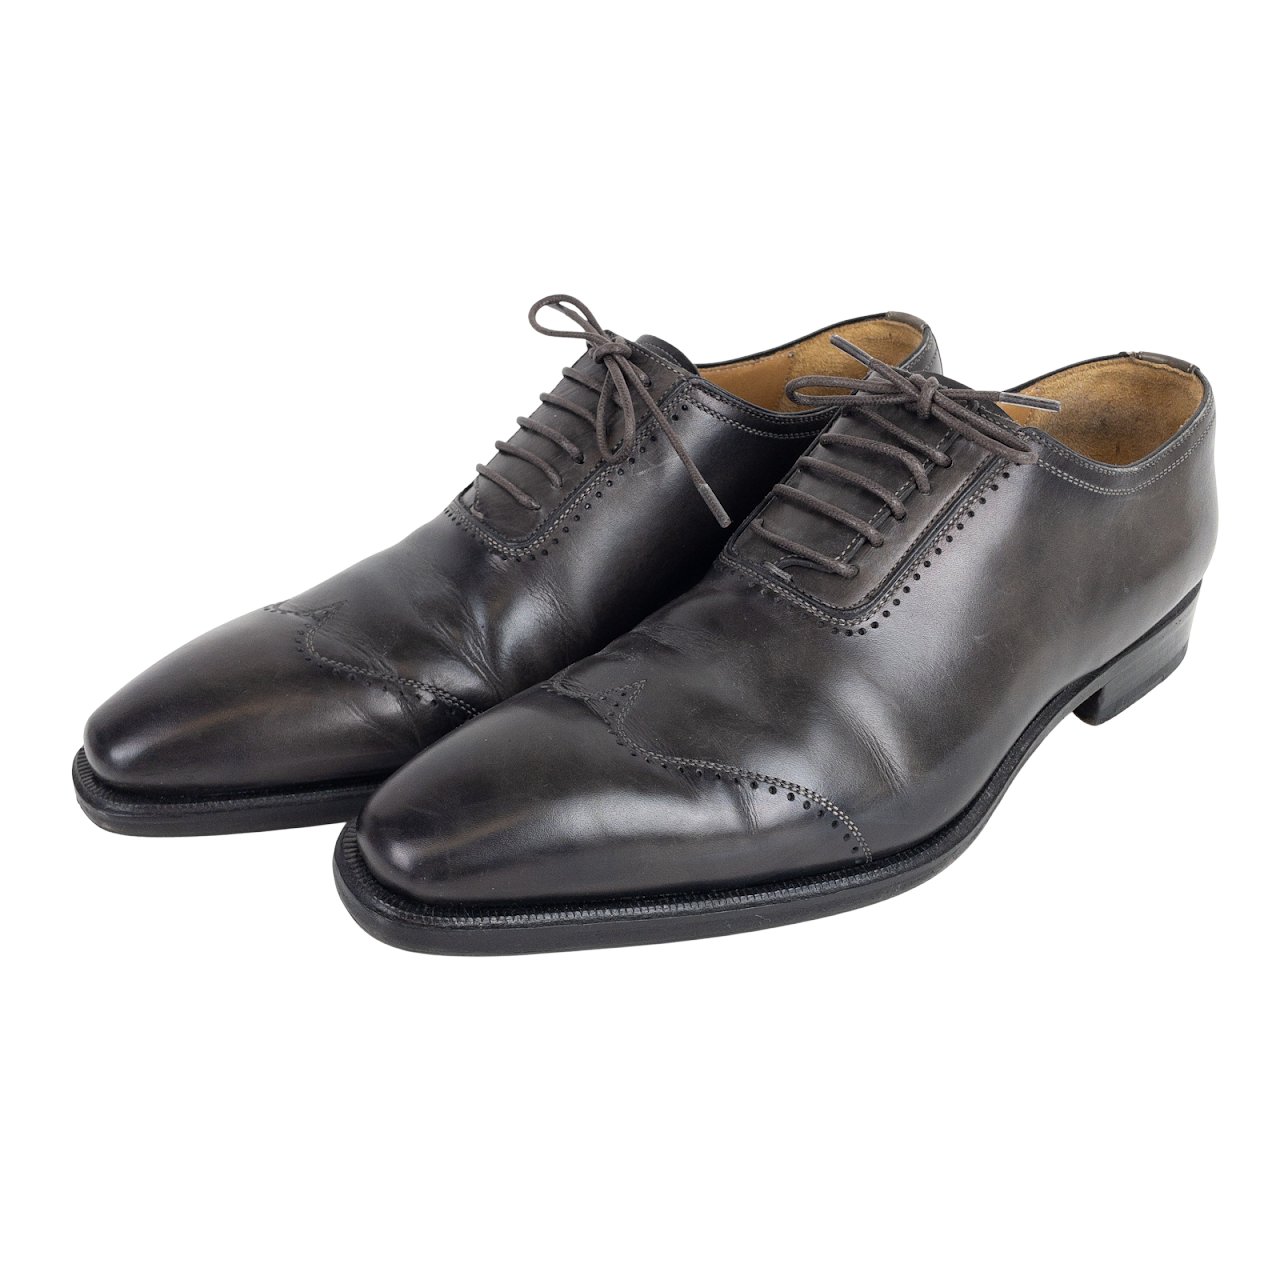 Magnanni Leather Derby Shoes